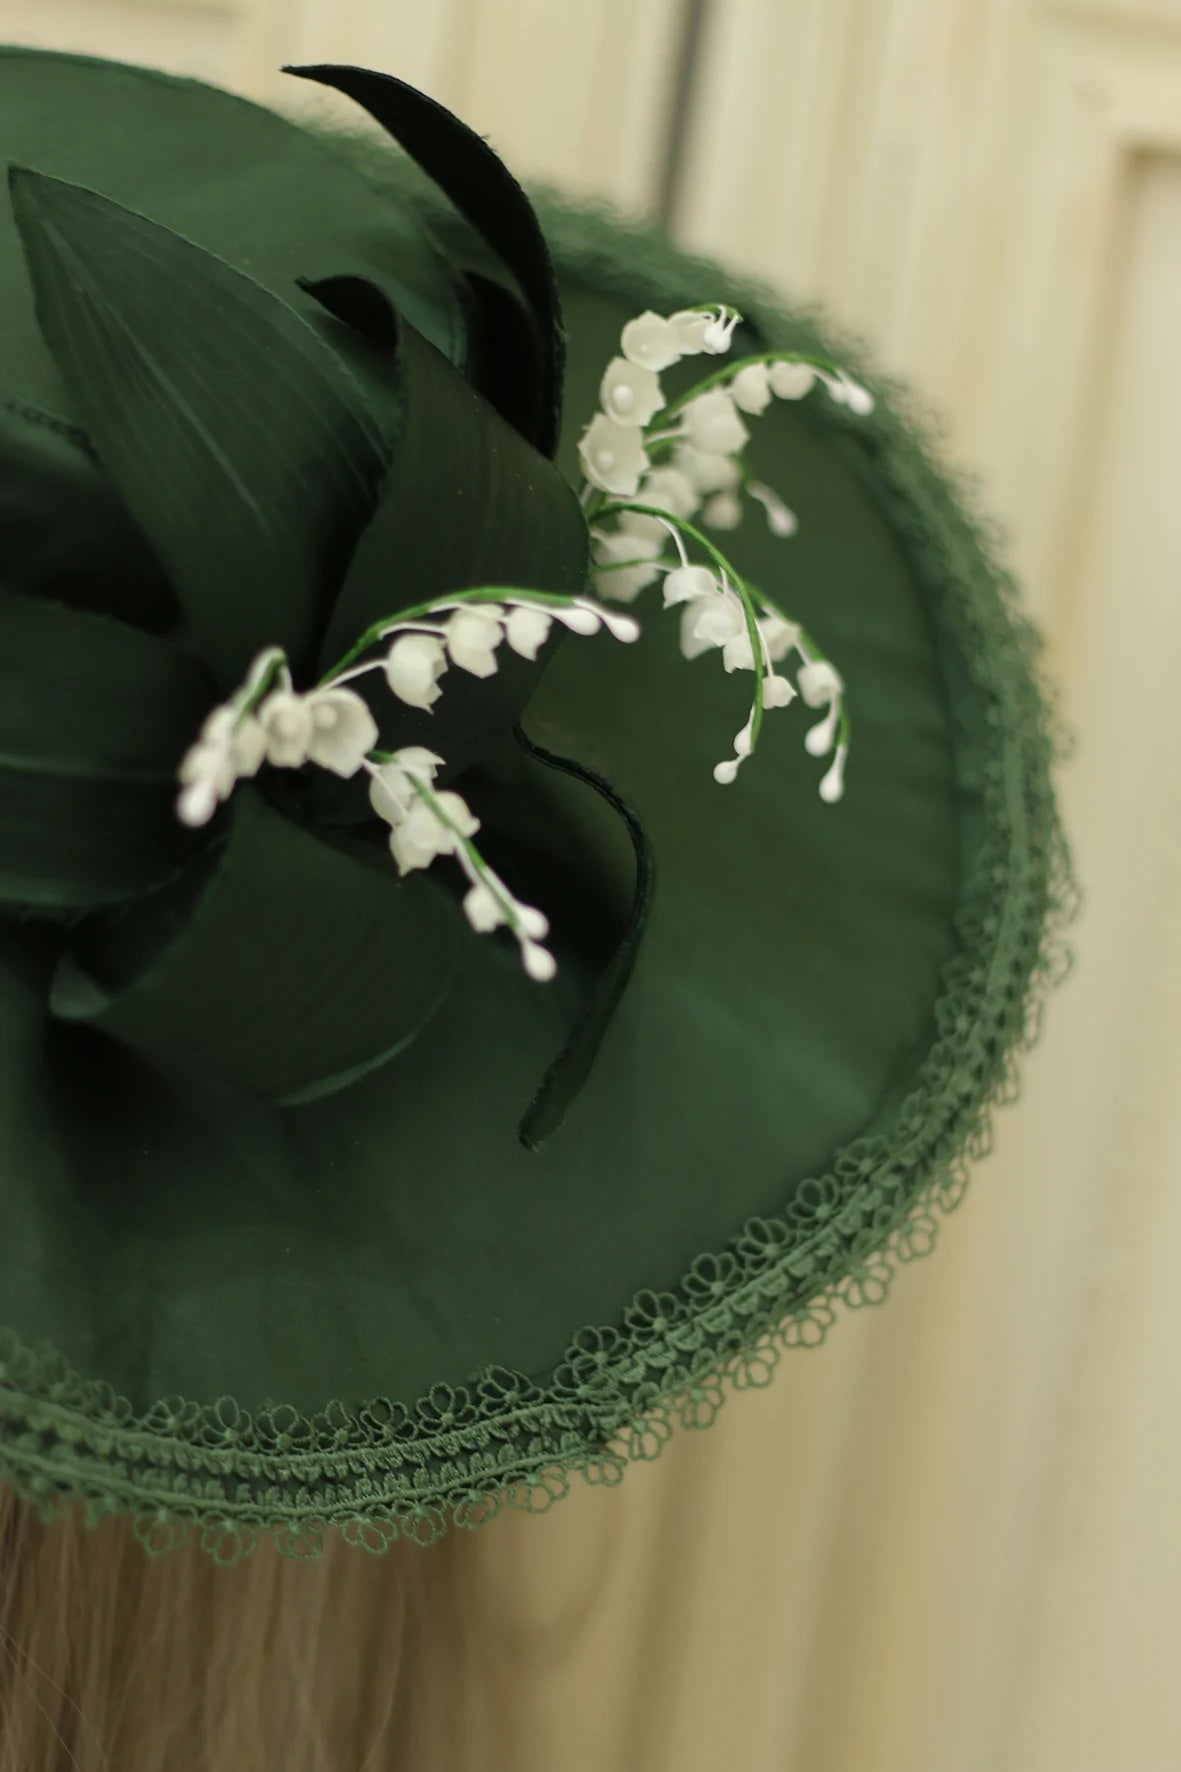 Vintage Inspired Floral Emerald Hat - lilies of the valley